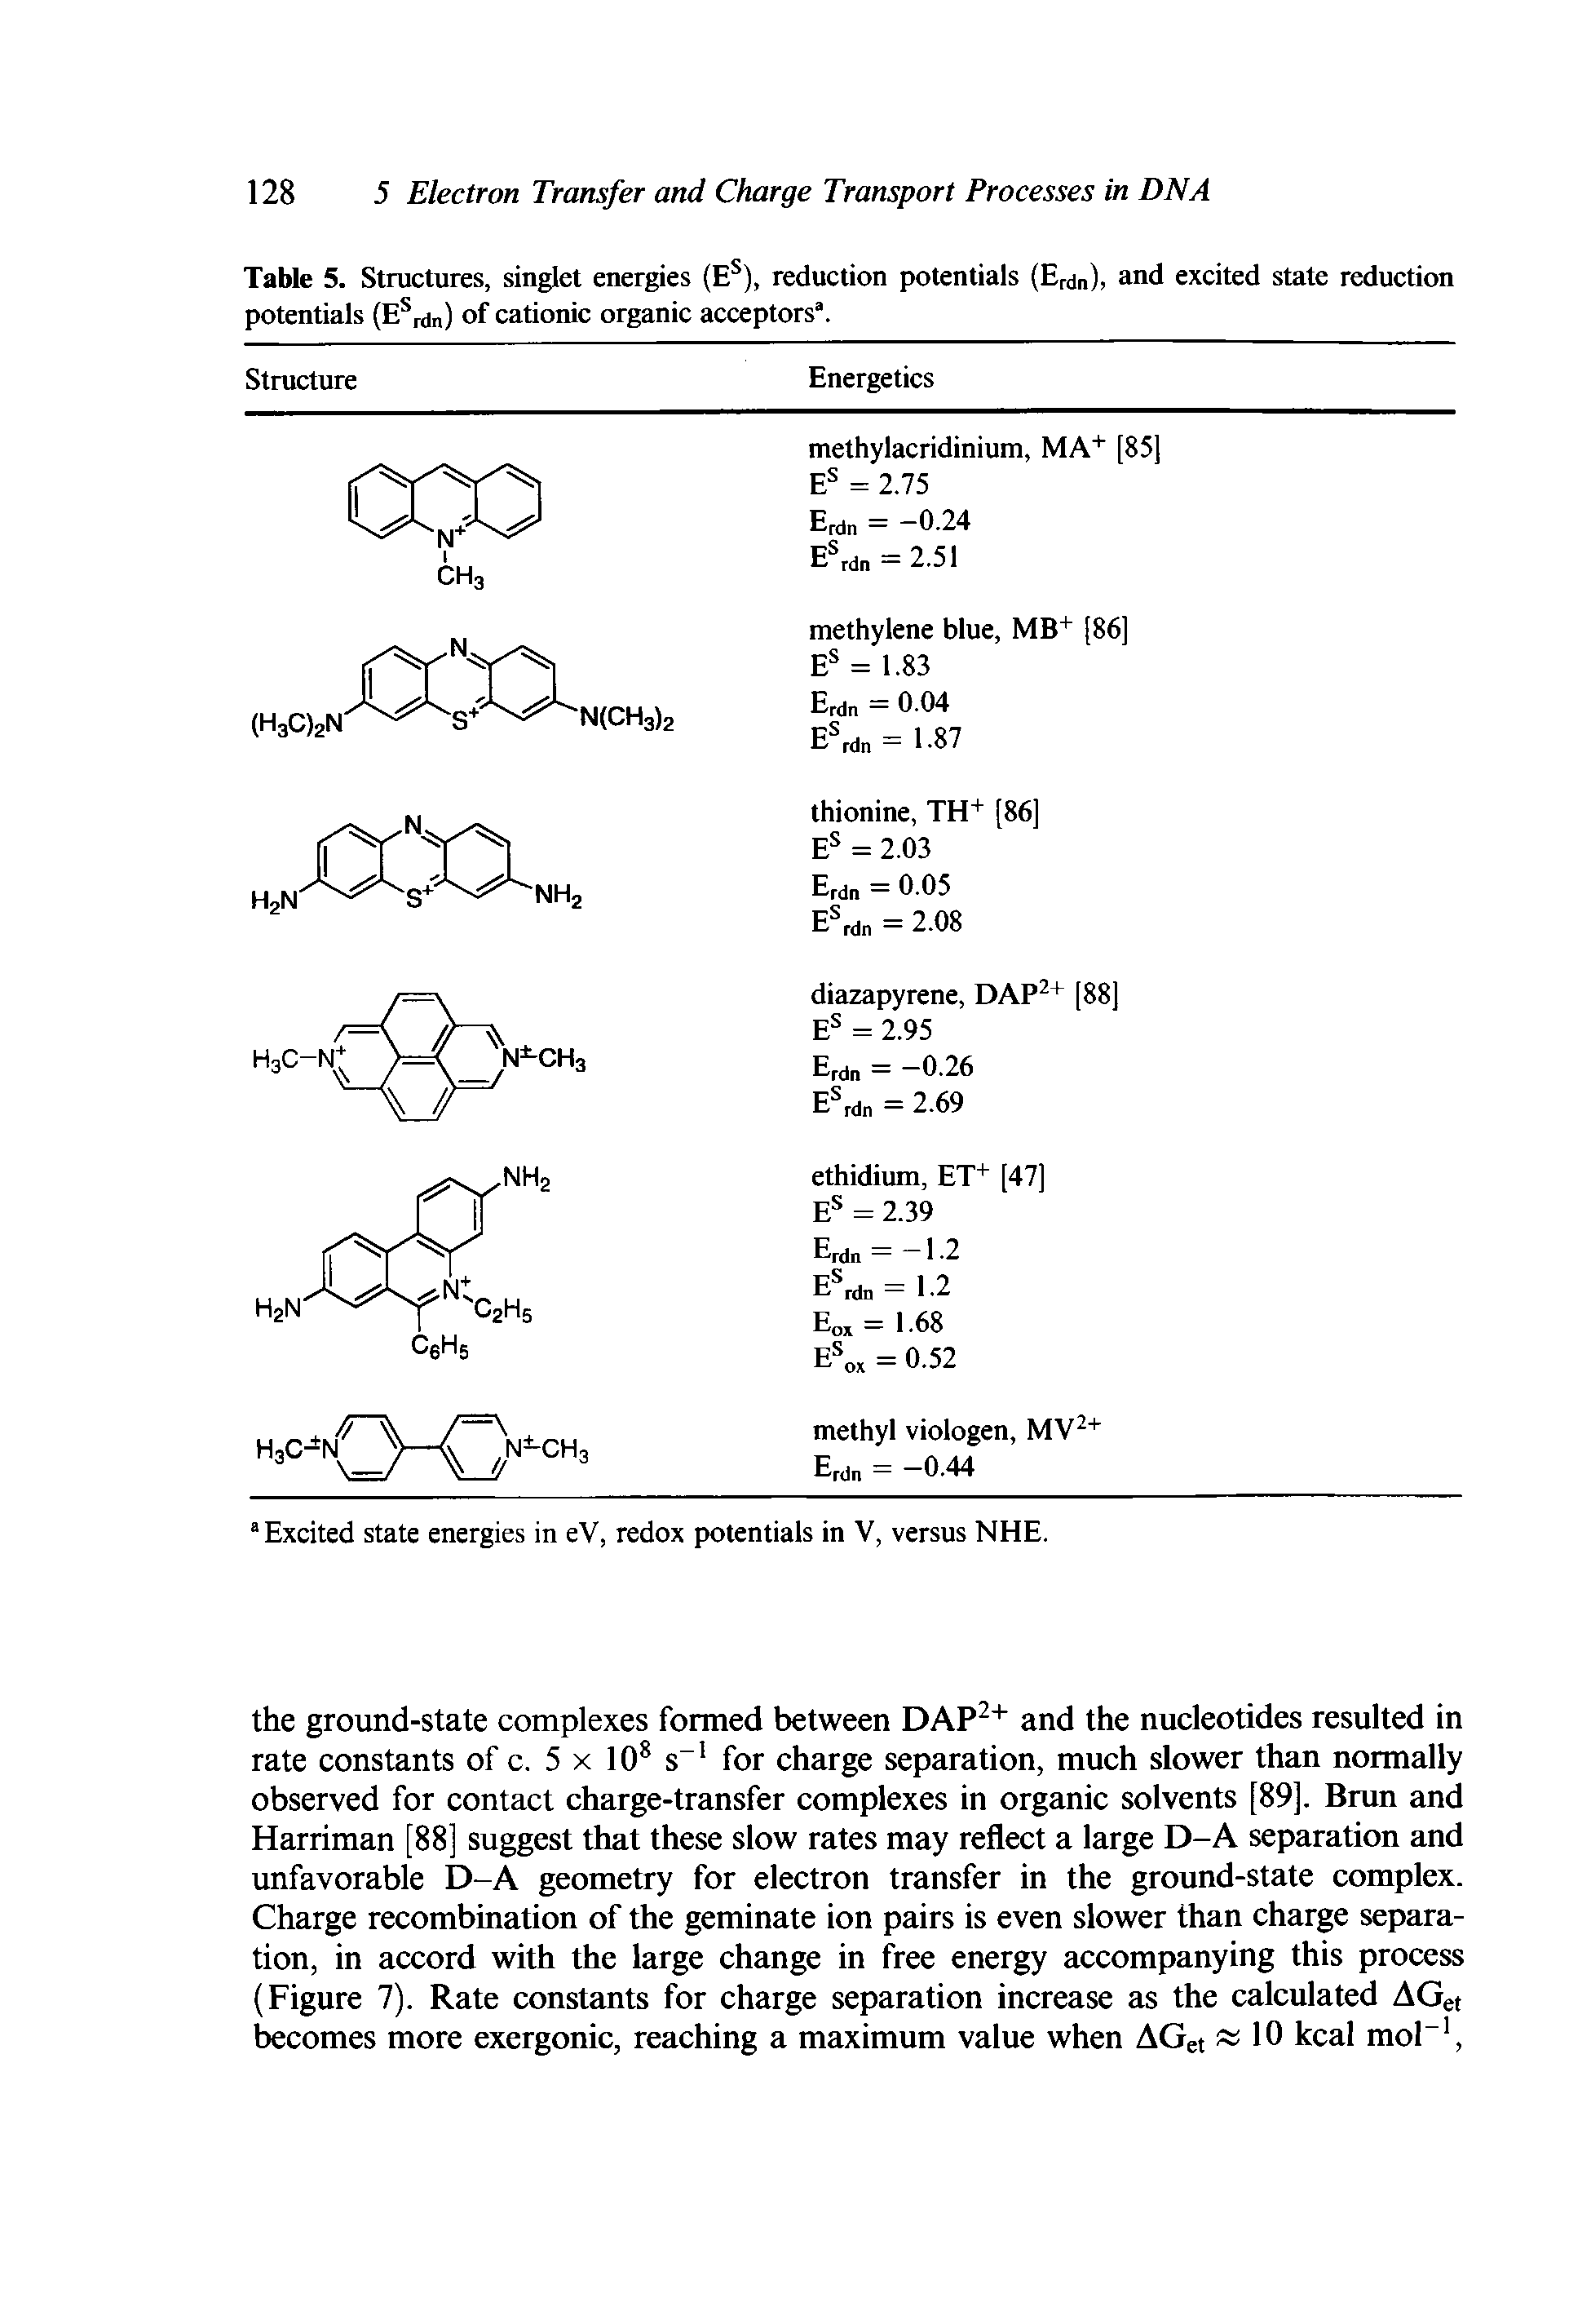 Table 5. Structures, singlet energies (E ), reduction potentials (Erdn), and excited state reduction potentials (E rdn) of cationic organic acceptors .